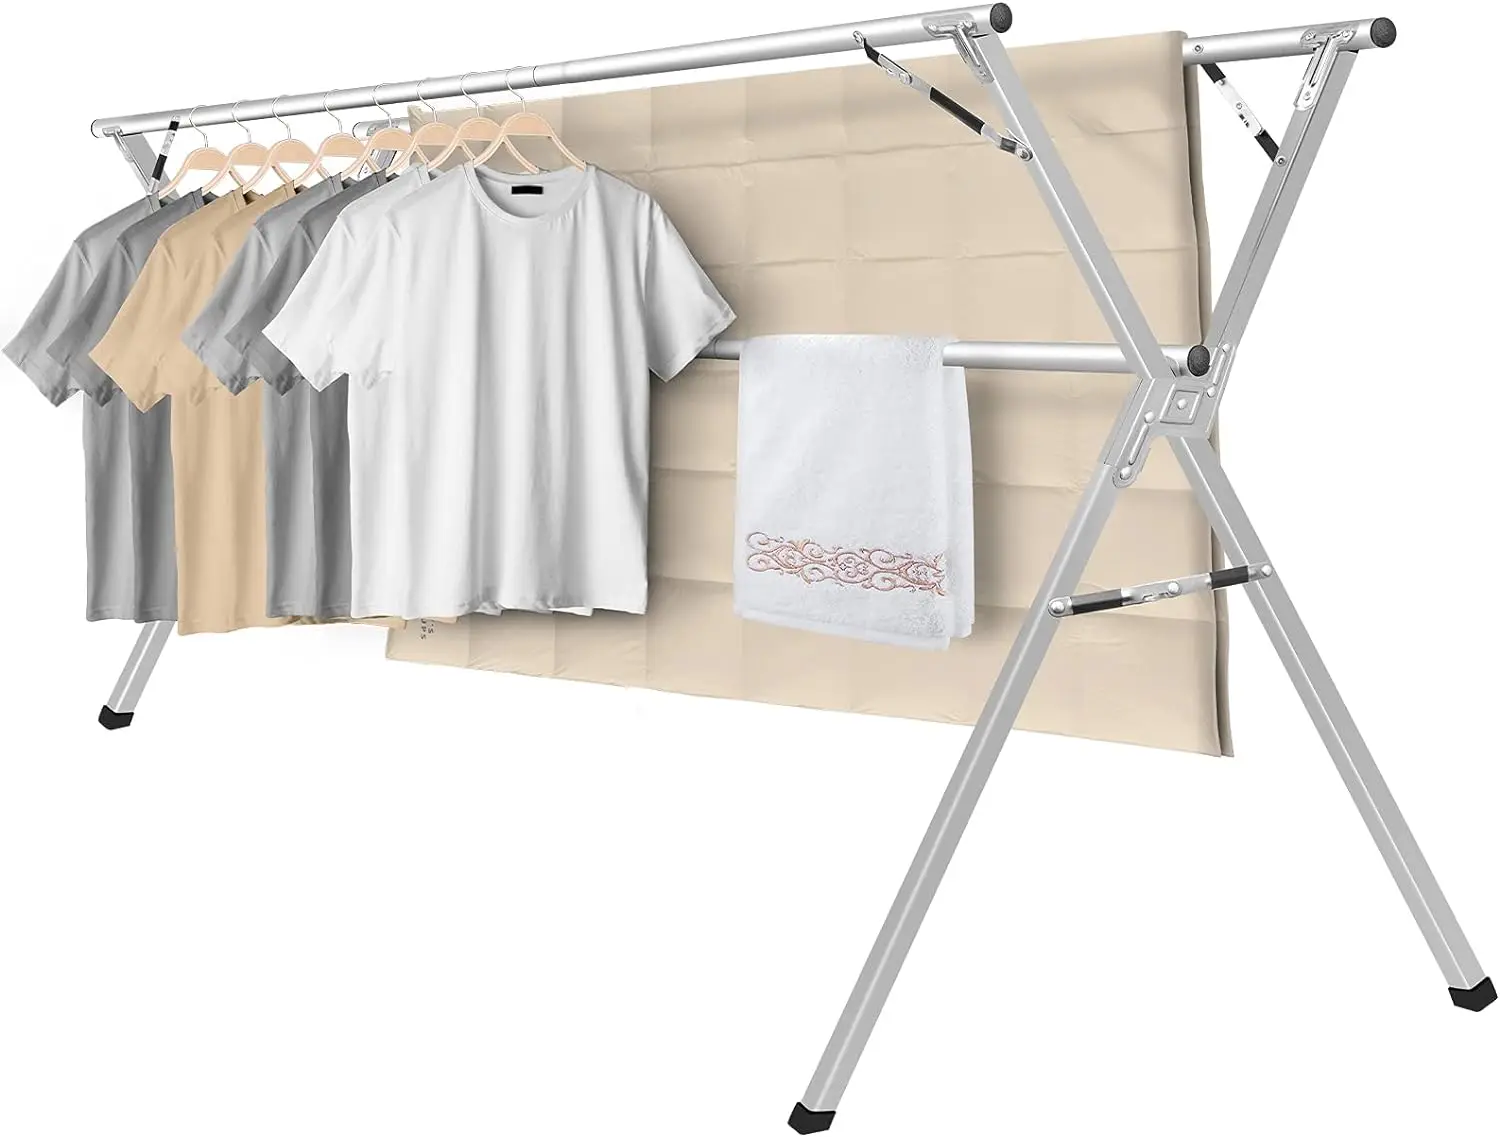 

Clothes Drying Rack, 79 inches Laundry Drying Rack Clothing Foldable & Collapsible Stainless Steel Heavy Duty Clothing